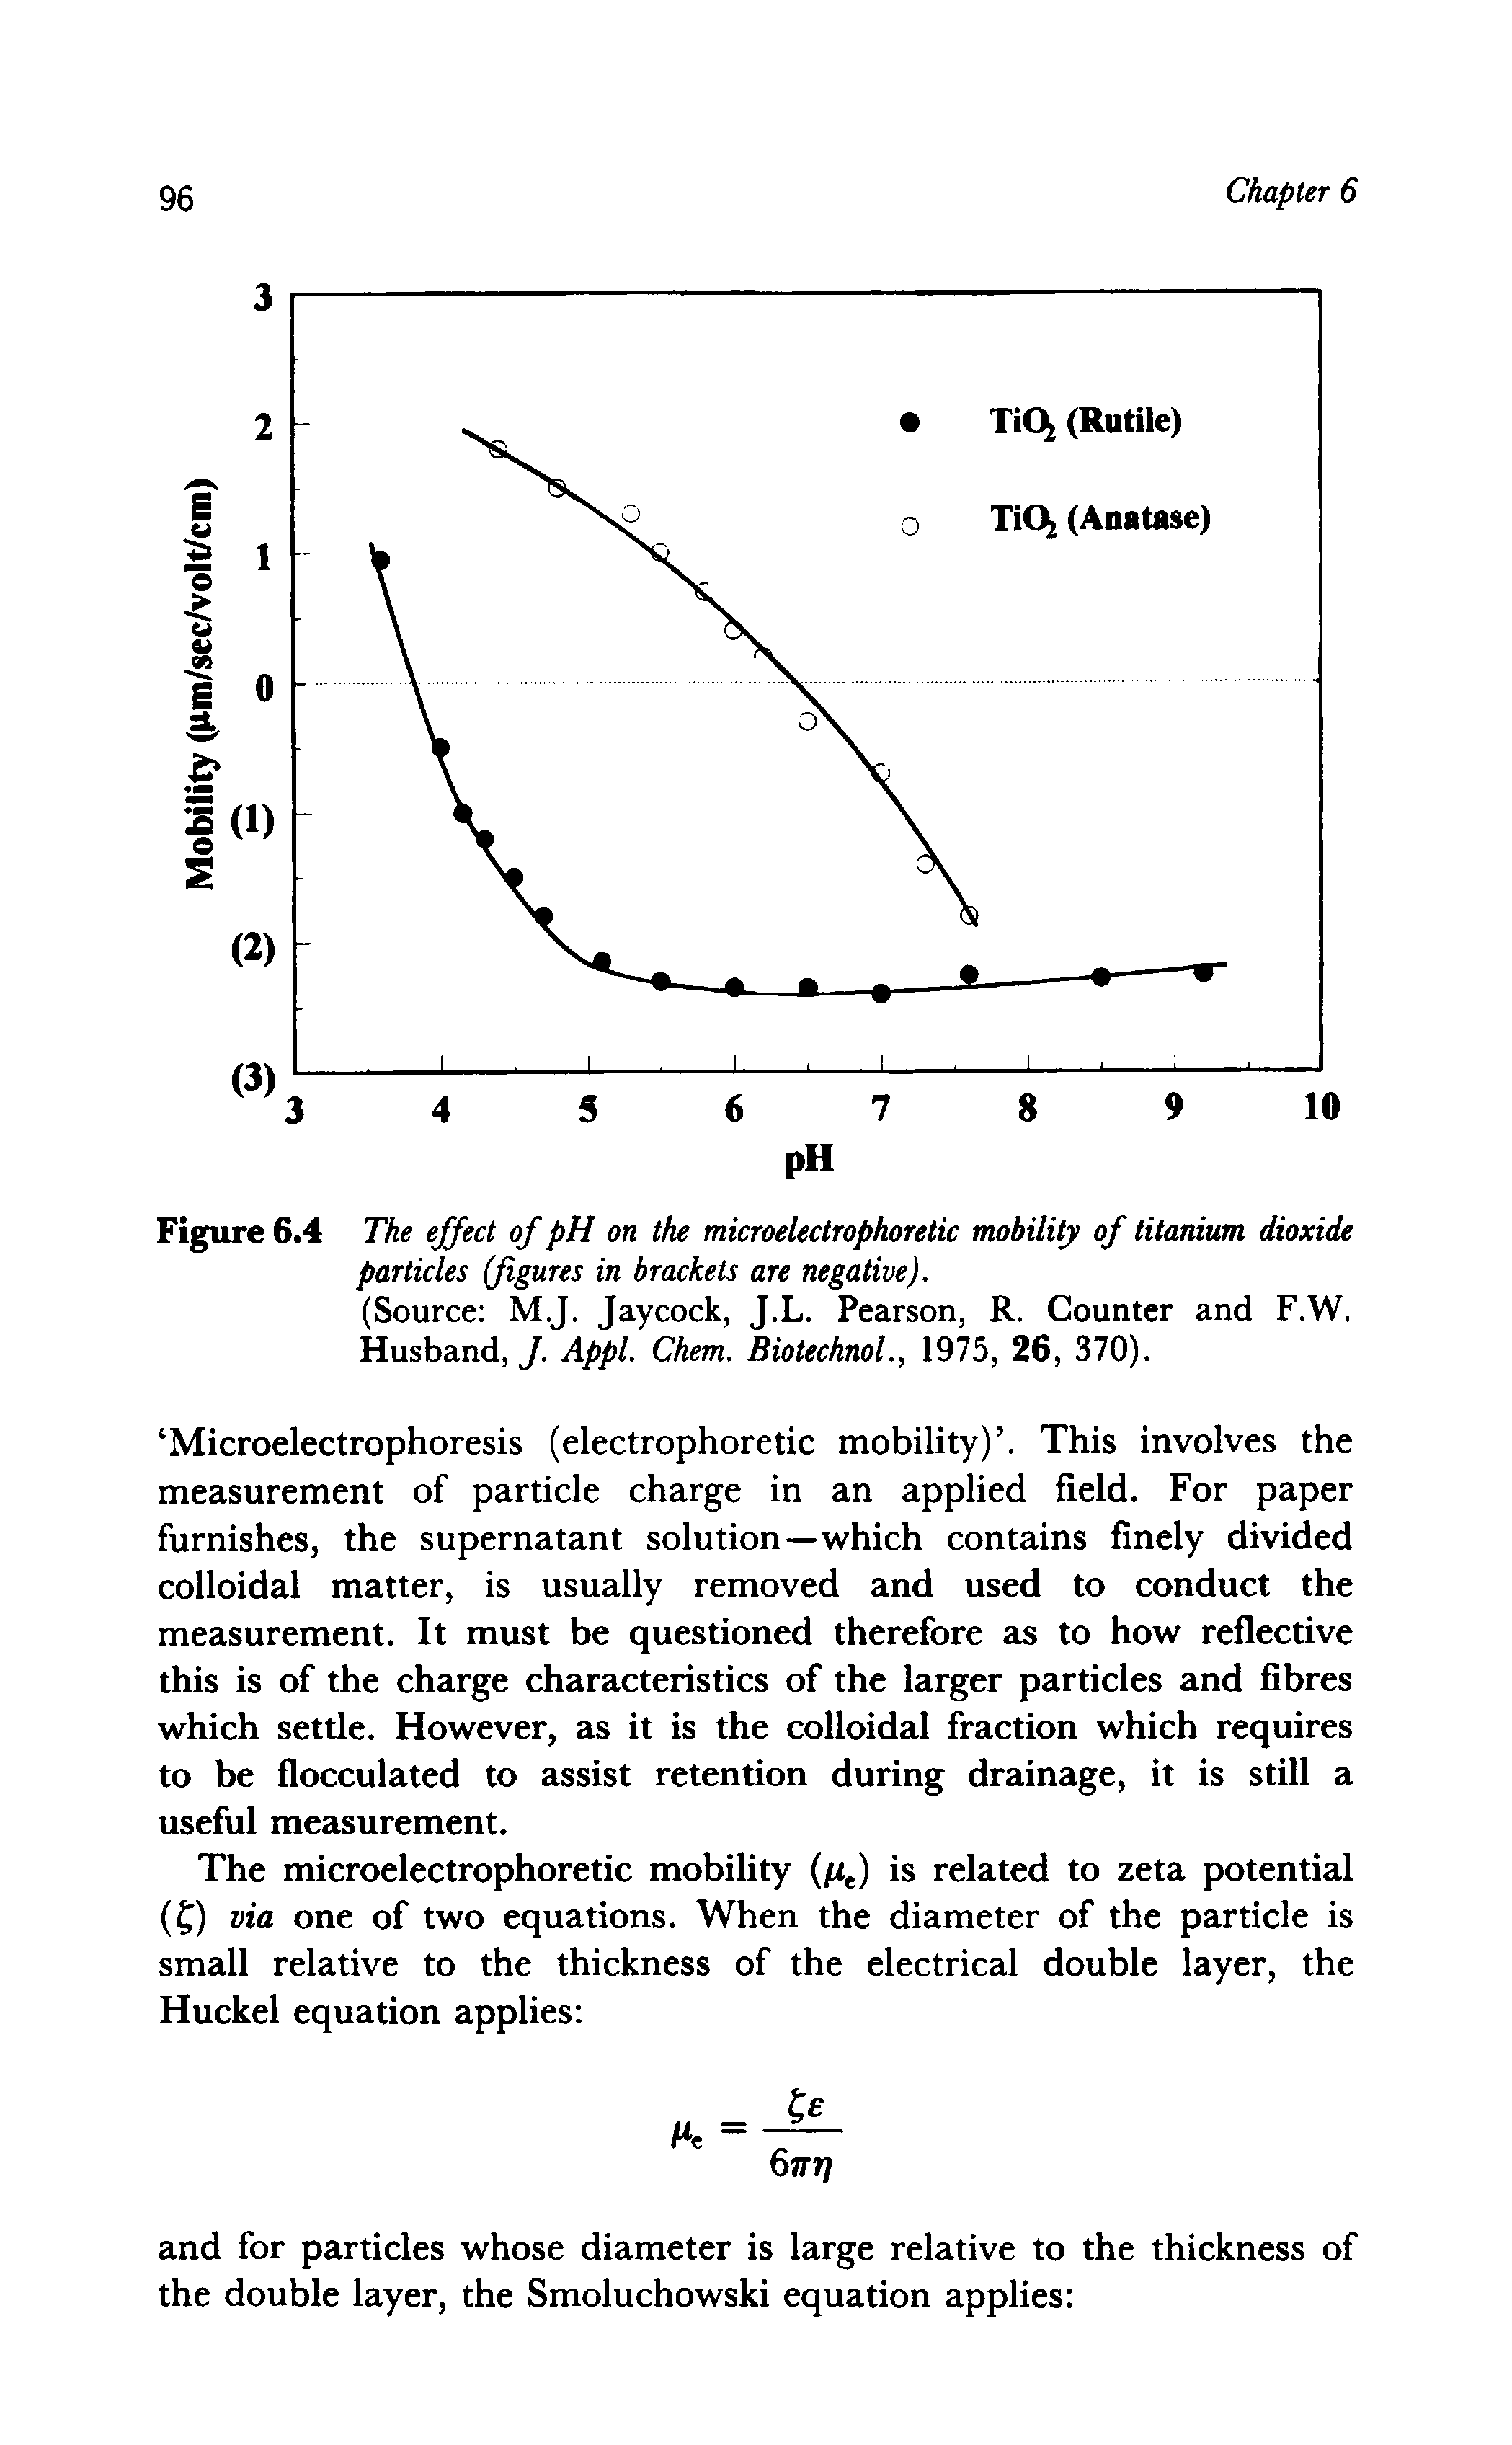 Figure 6.4 The effect of pH on the microelectrophoretic mobility of titanium dioxide particles (figures in brackets are negative).